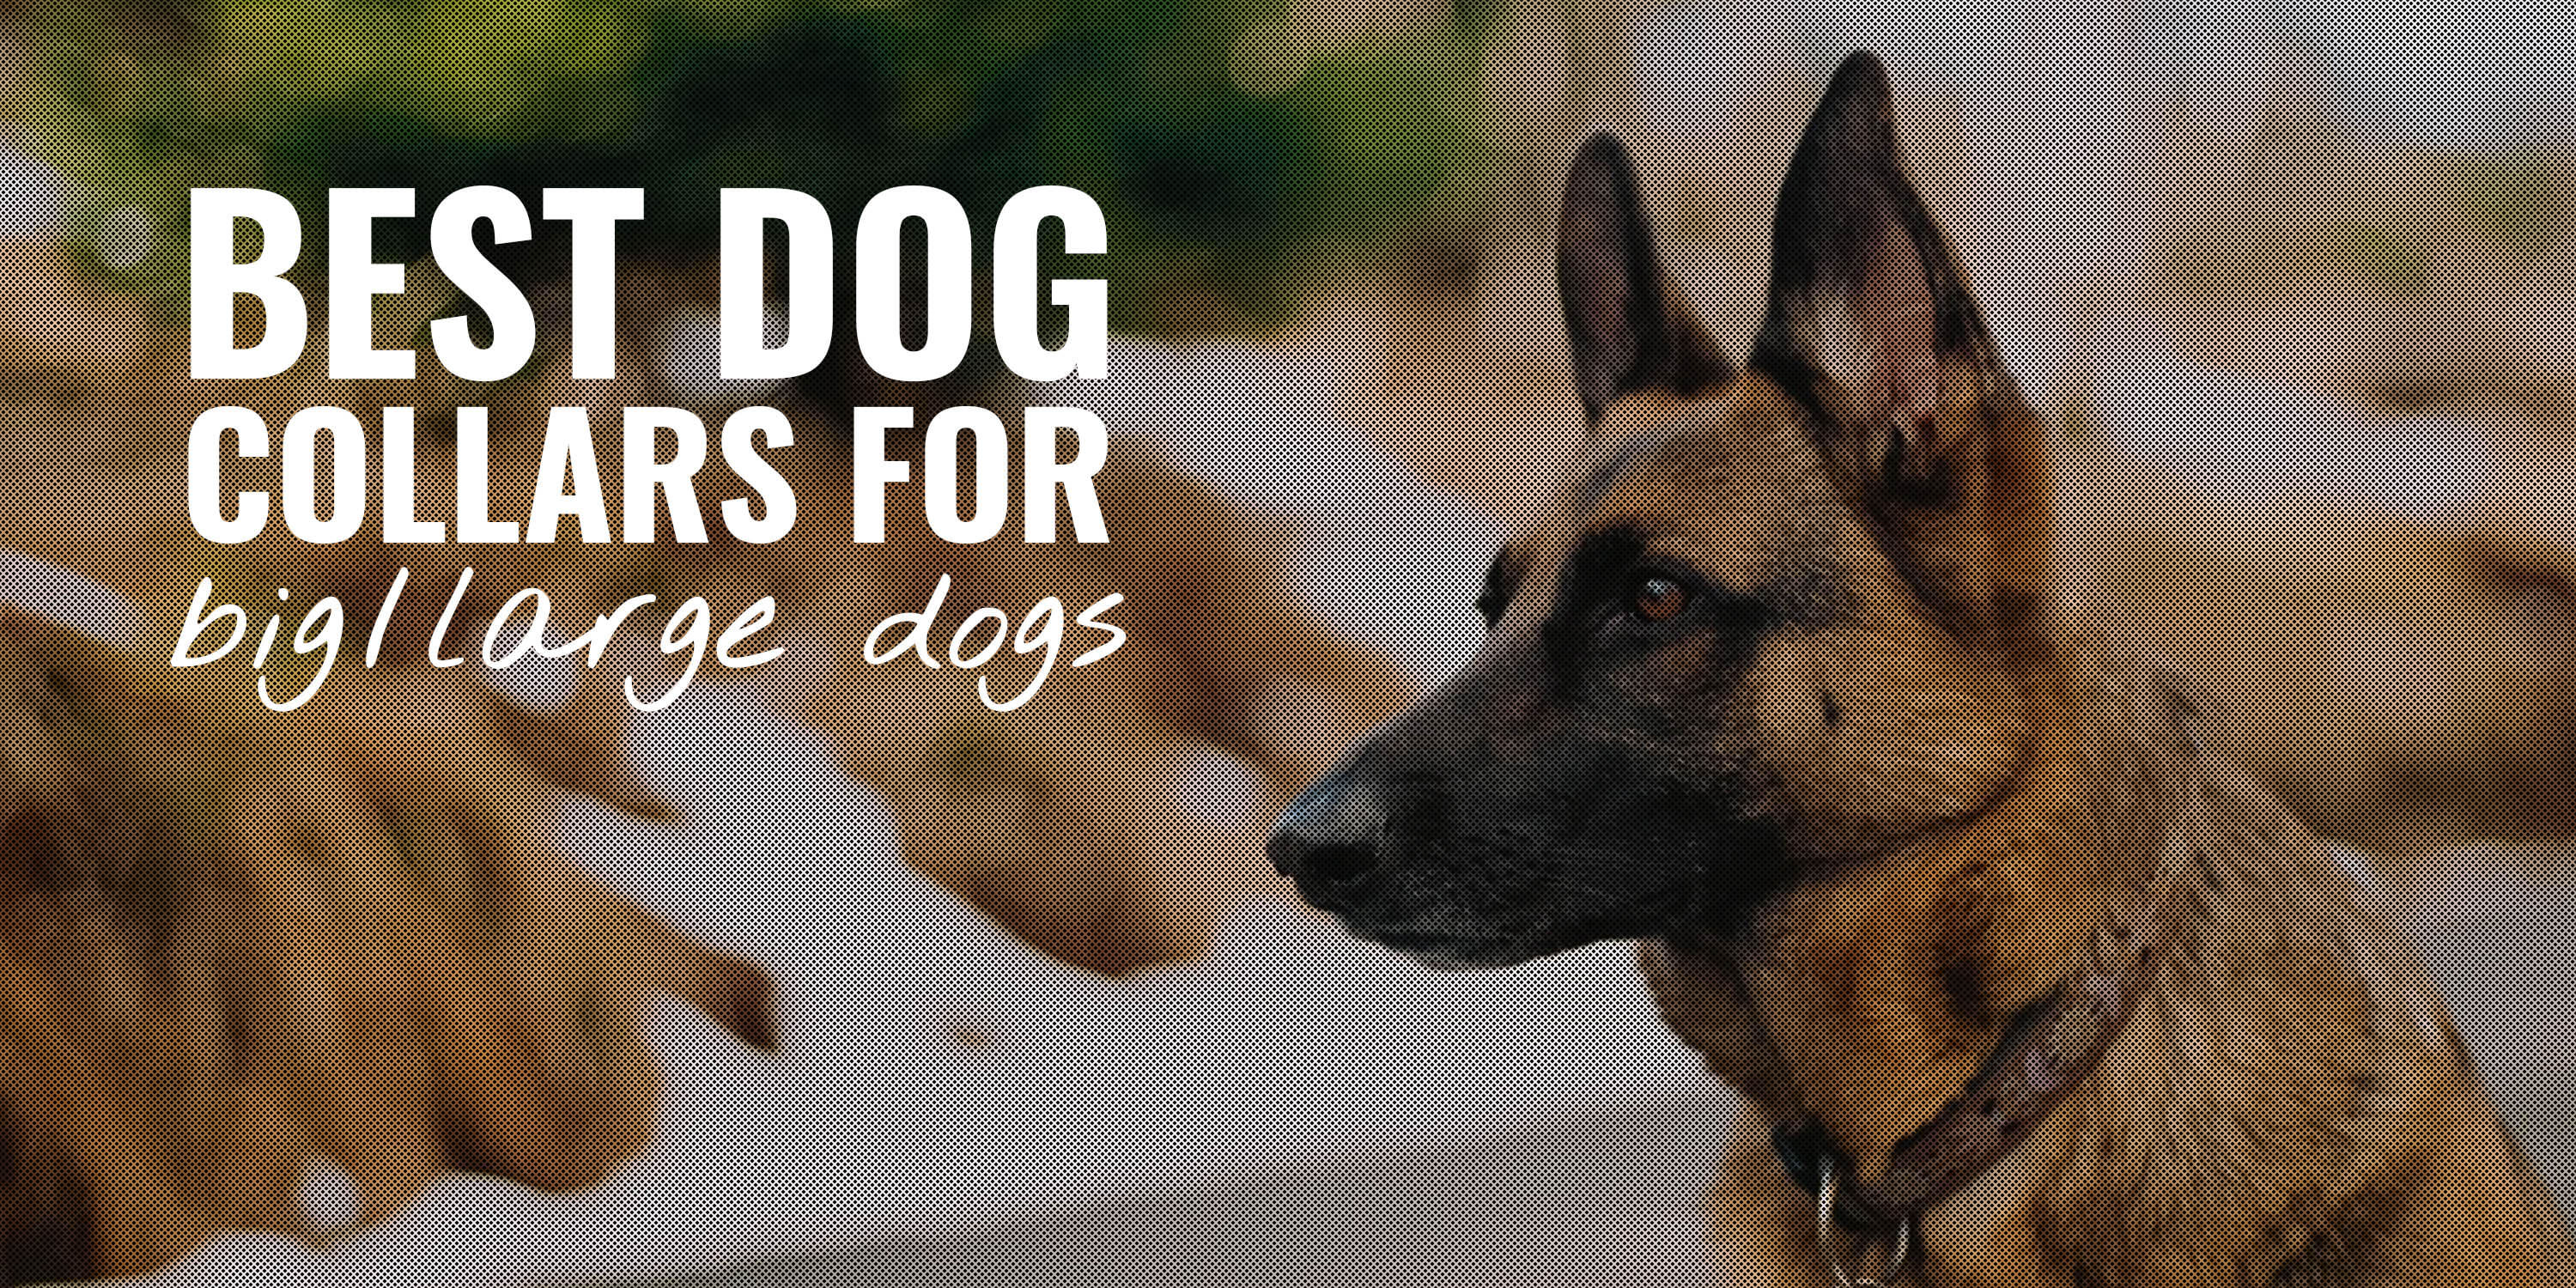 best dog collars or big large dogs